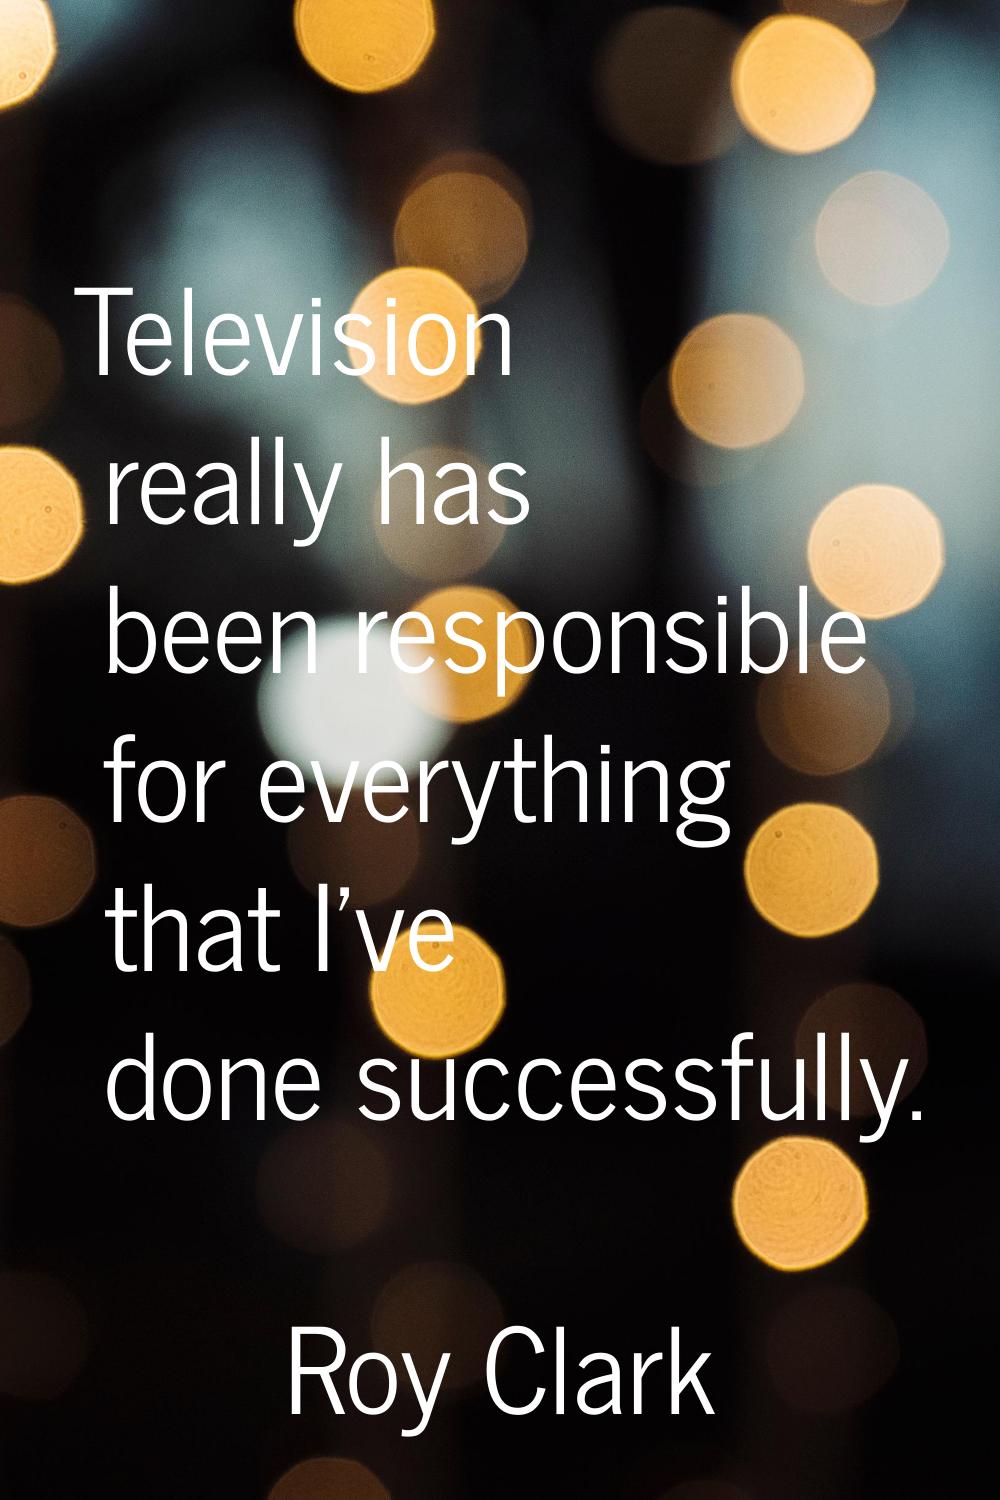 Television really has been responsible for everything that I've done successfully.